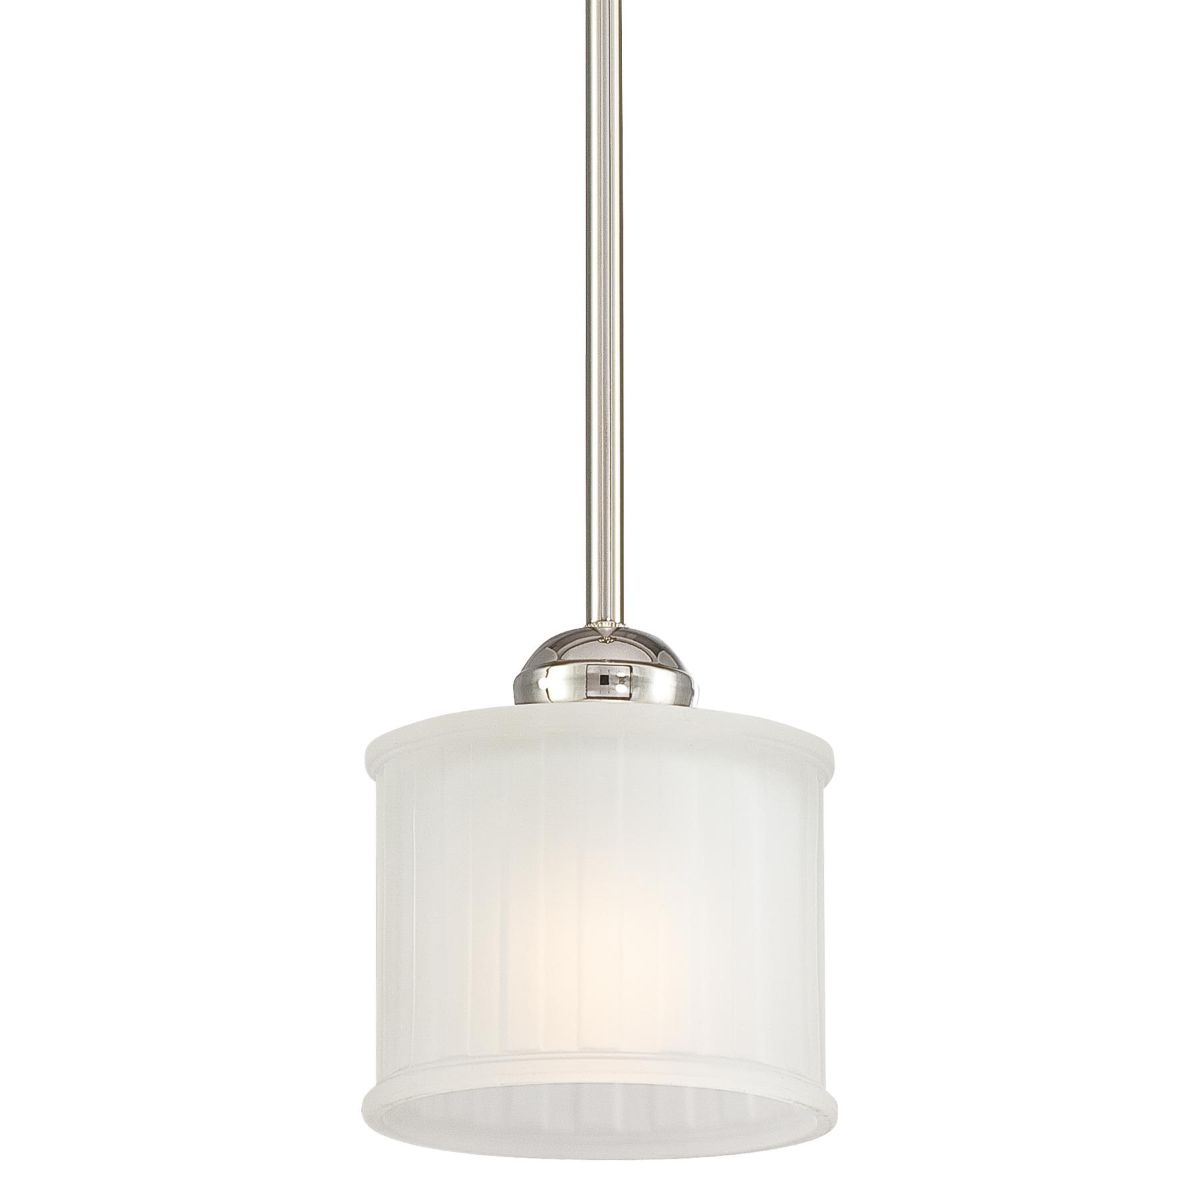 1730 Series 6 in. Pendant Light Polished Nickel Finish